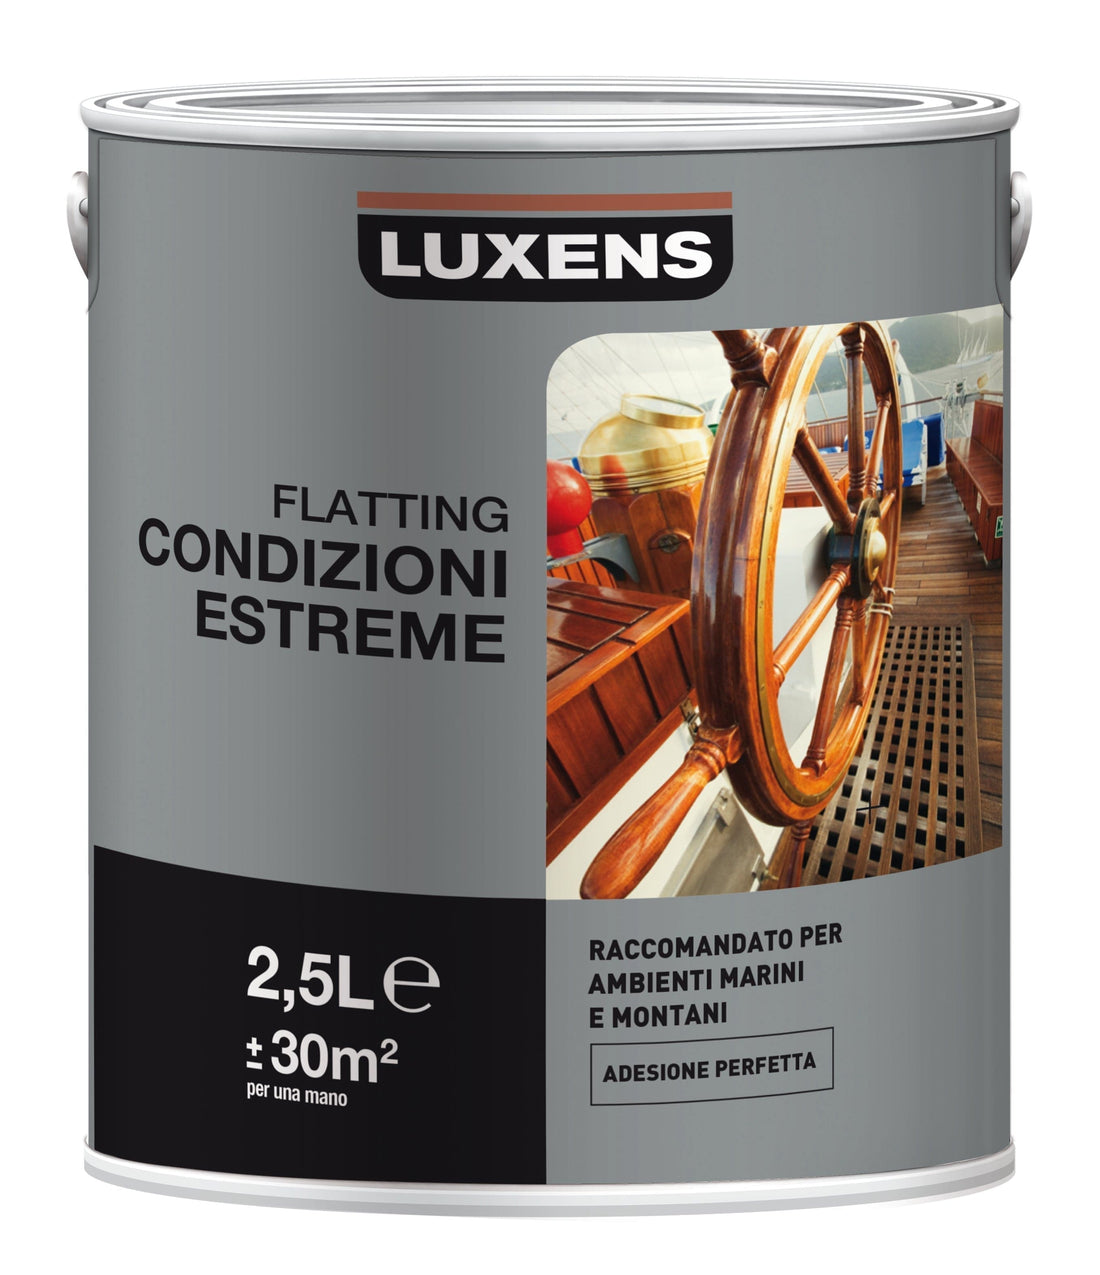 SOLVENT-BASED EXTREME CLIMATE FLATTING 2.5L LUXENS - best price from Maltashopper.com BR470001906